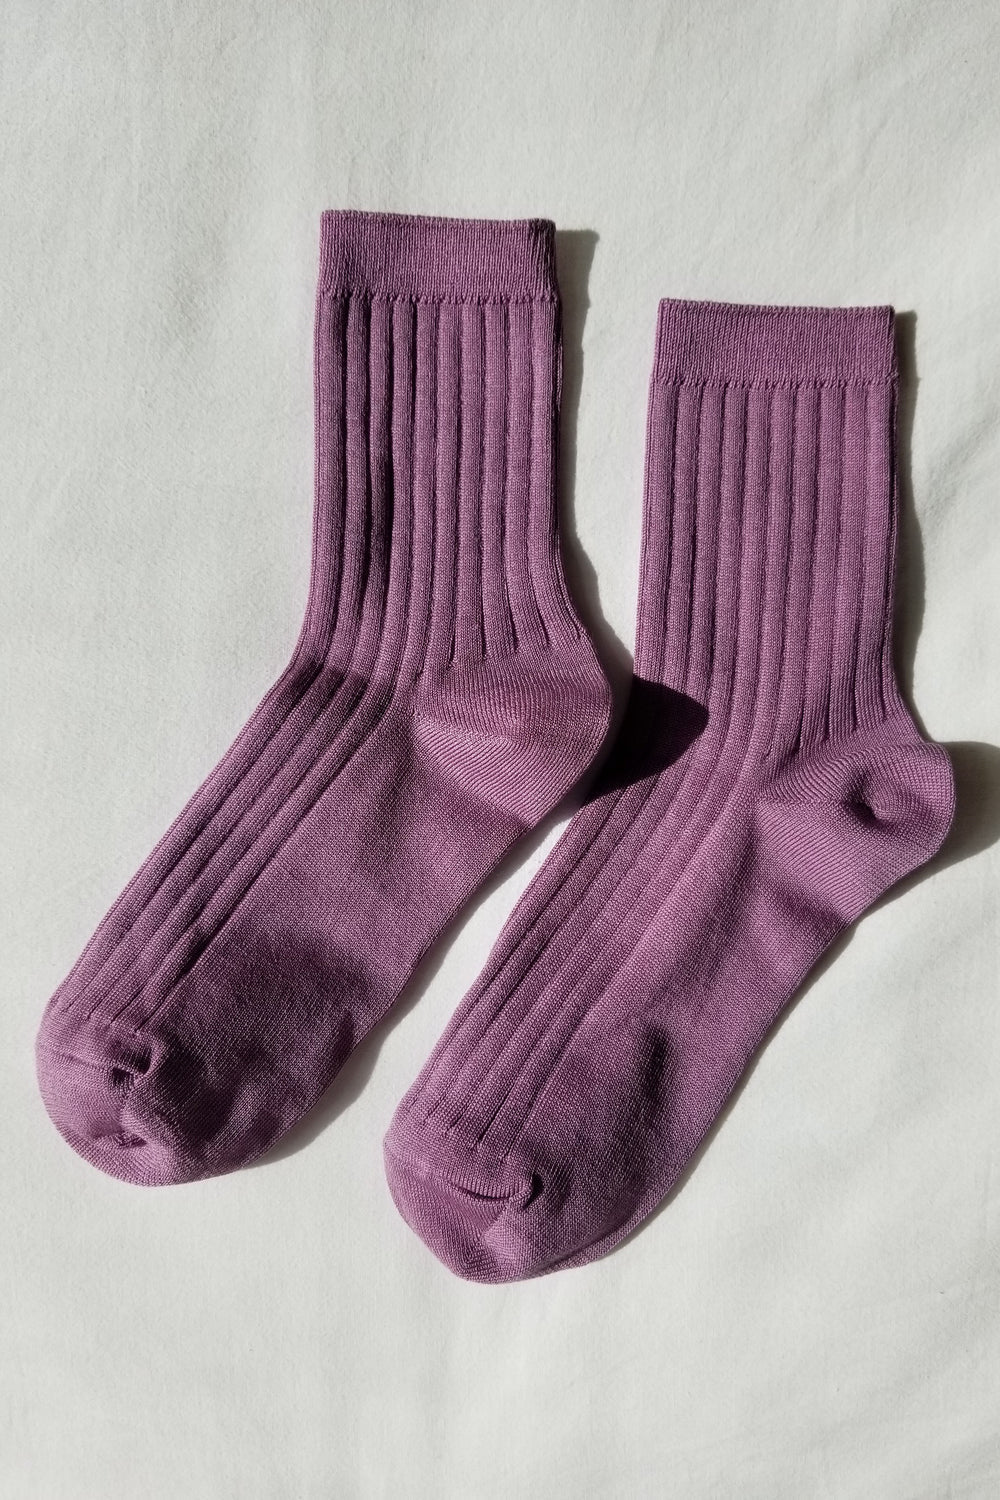 Her socks - orchid